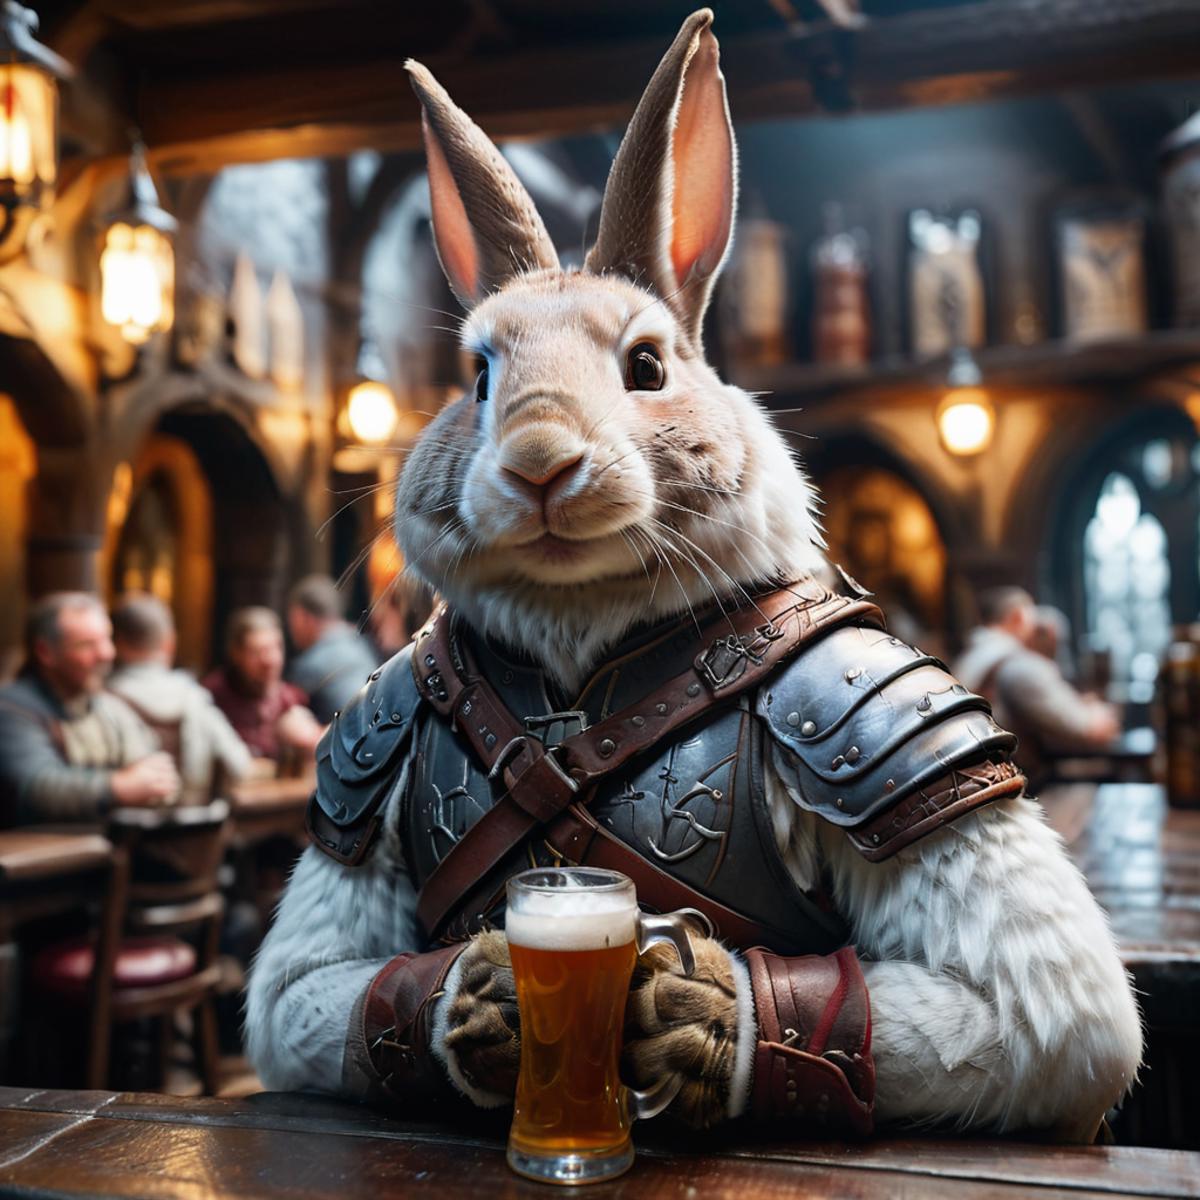 A Bunny Rabbit in Medieval Armor Holding a Beer Mug.